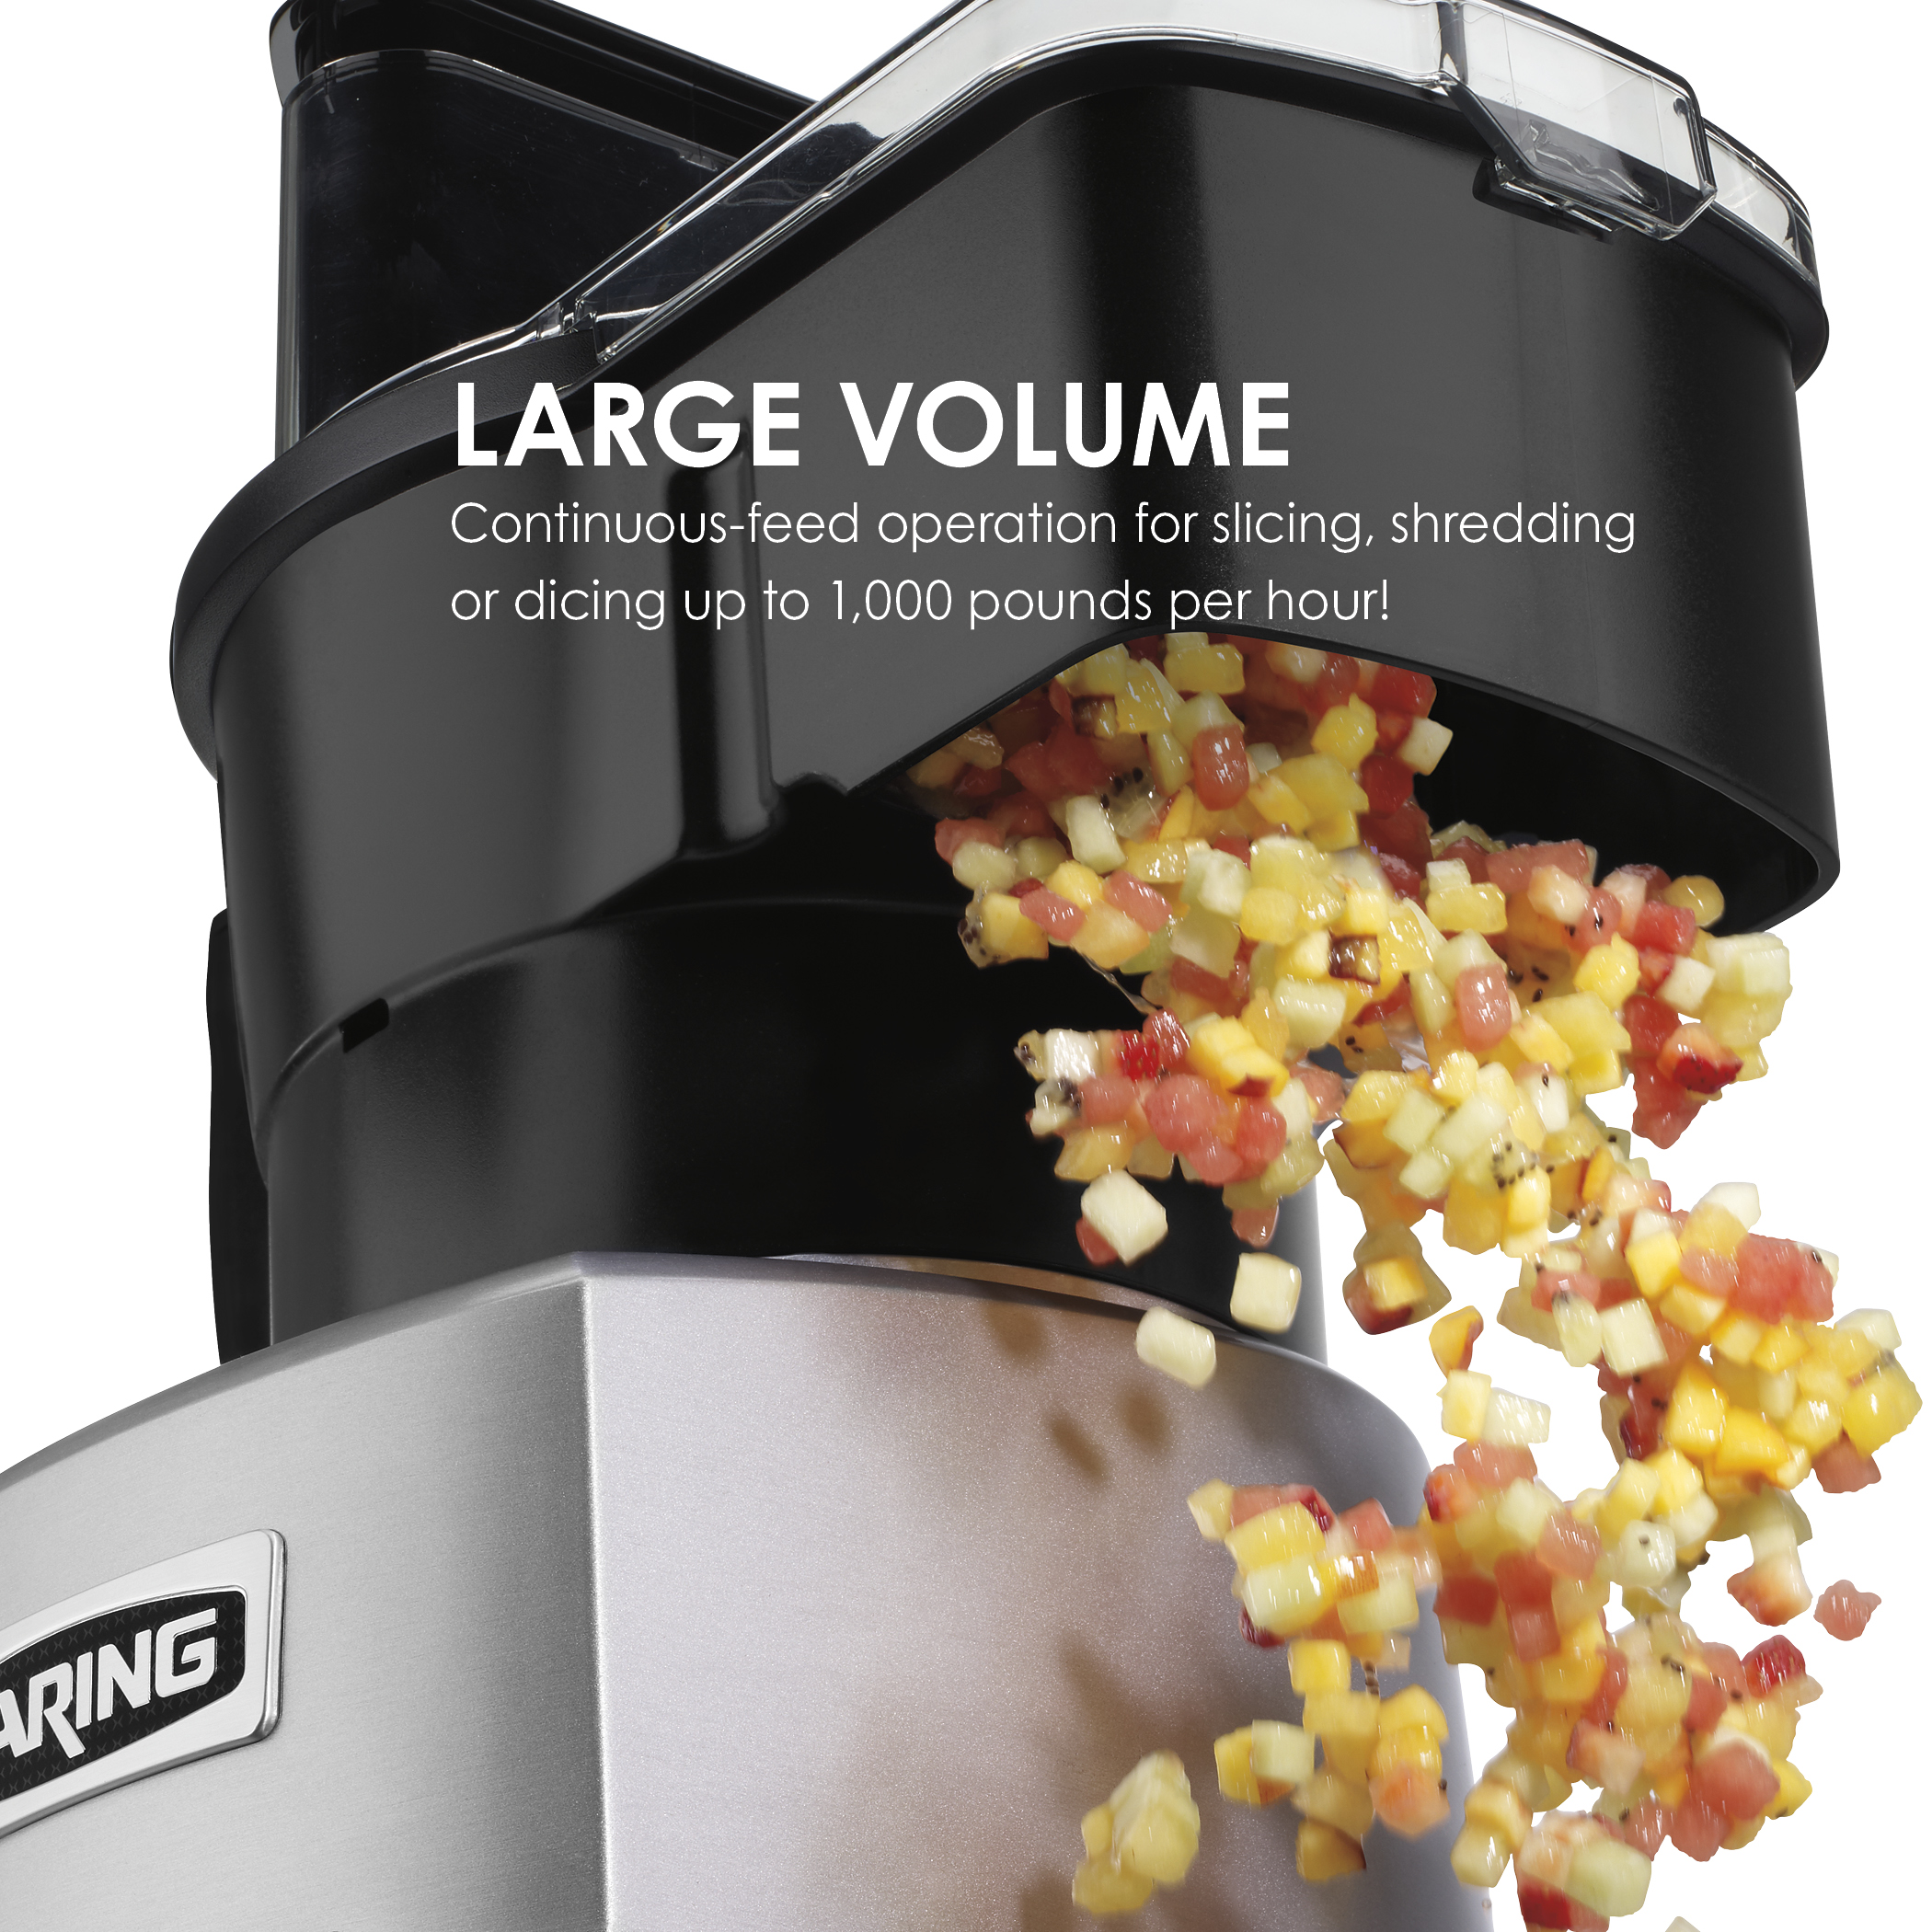 Waring Commercial 4 Qt. Batch Bowl Food Processor with LiquiLock® Seal  System